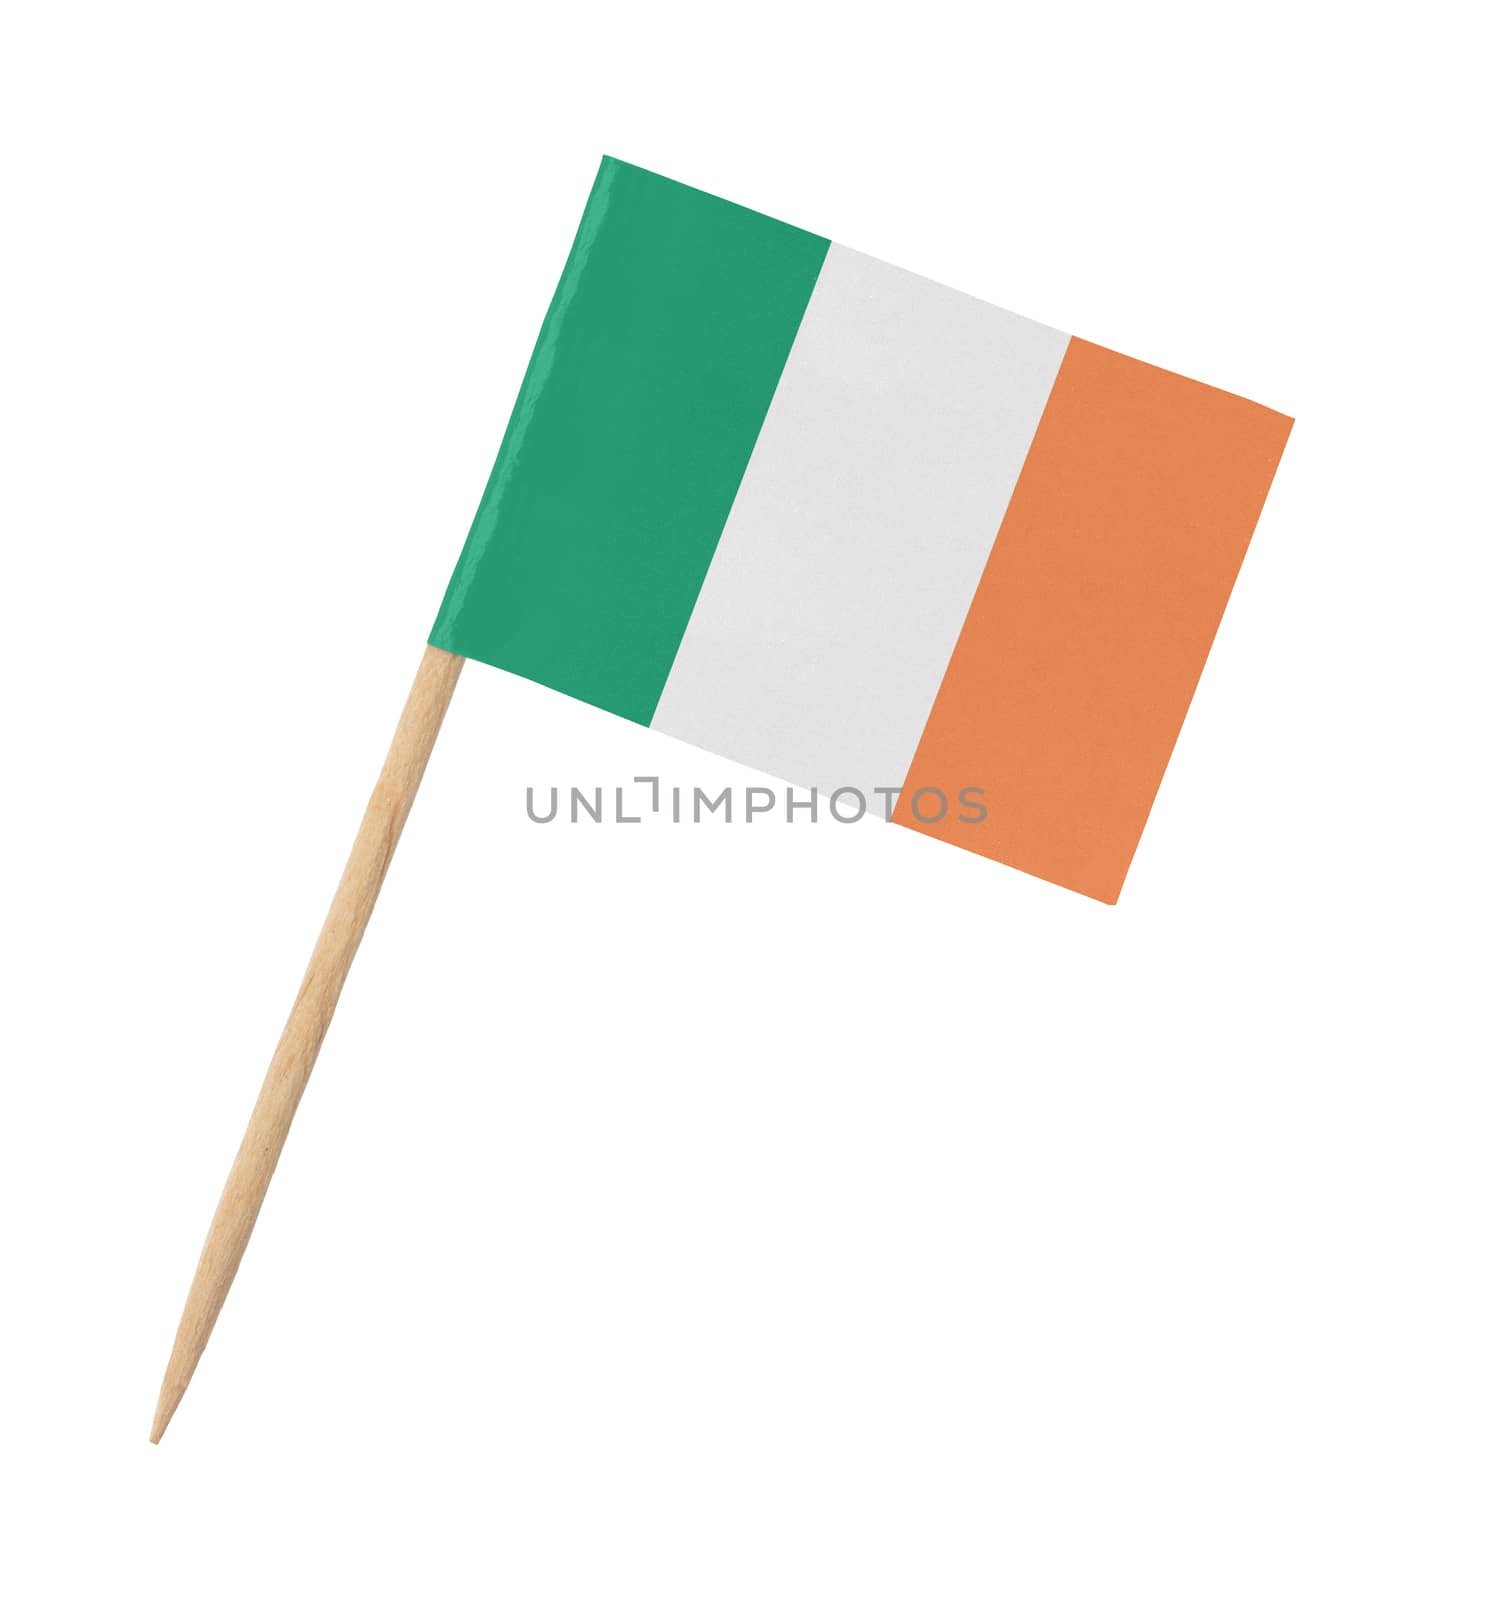 Small paper Irish flag on wooden stick, isolated on white